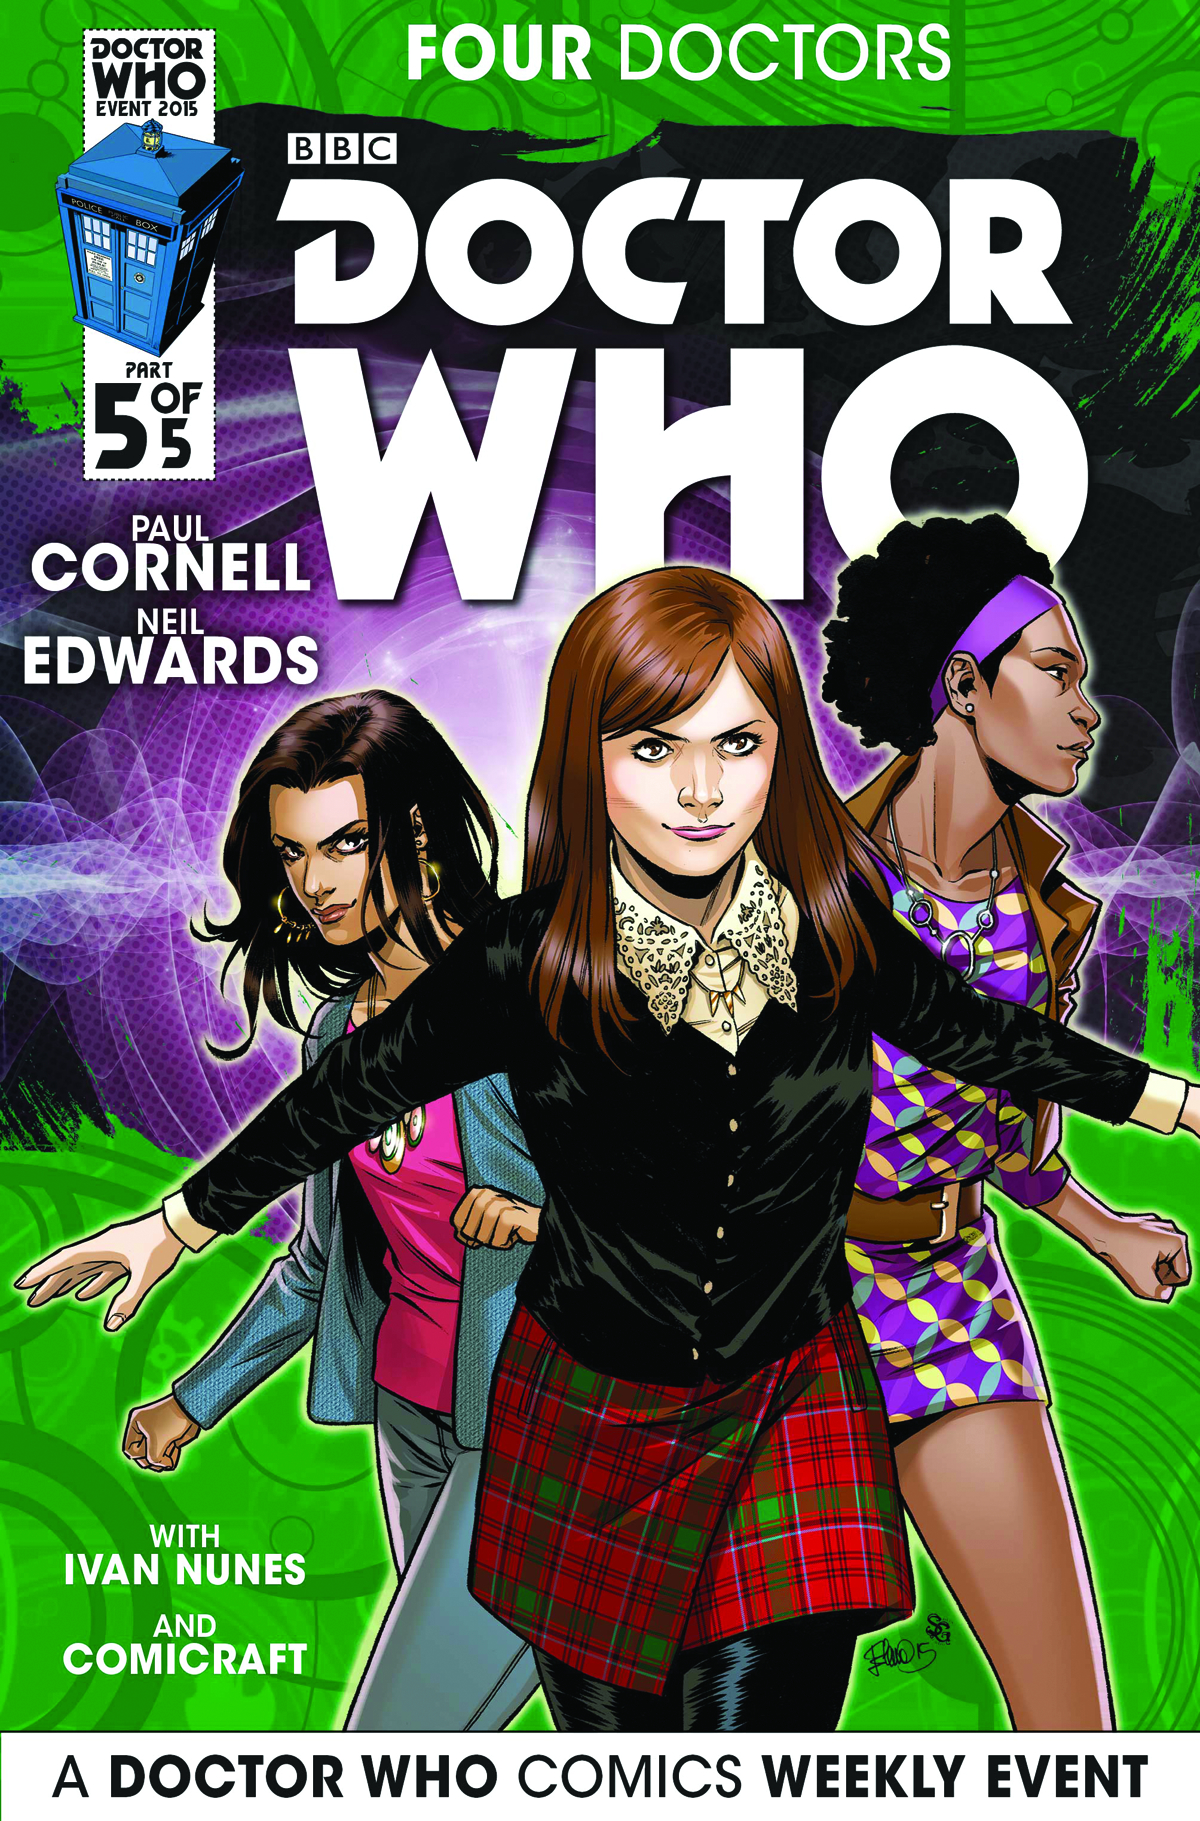 DOCTOR WHO 2015 FOUR DOCTORS #5 (OF 5) 25 COPY INCENTIVE CAS